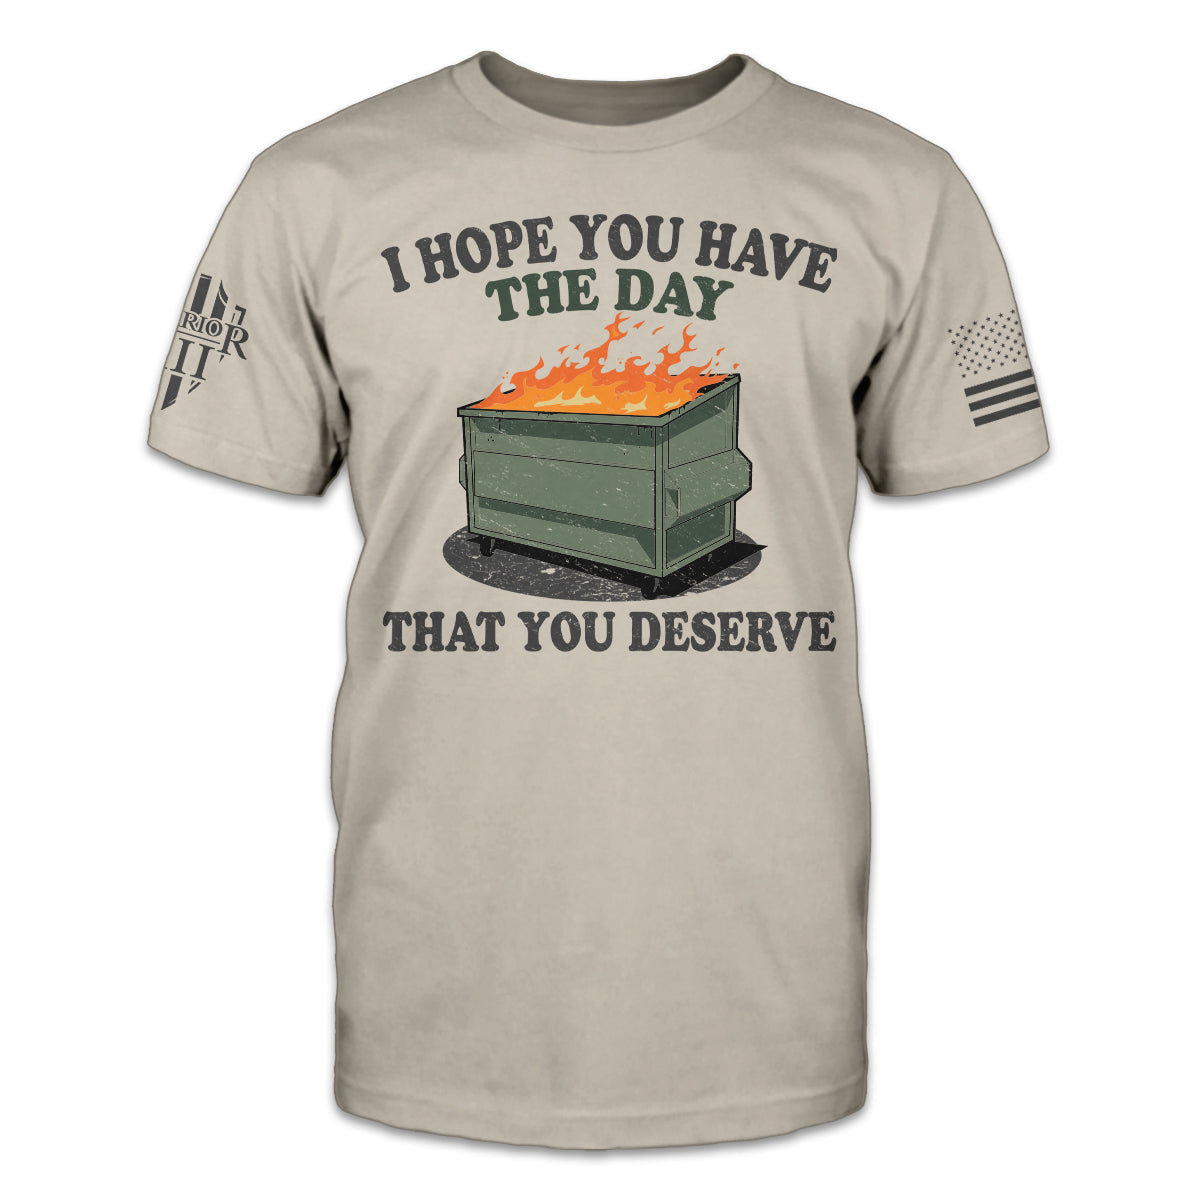 A light tan t-shirt with the words, "I hope you have the day that you deserve (a dumpster fire of a day), with a dumpster on fire printed on the front of the shirt.